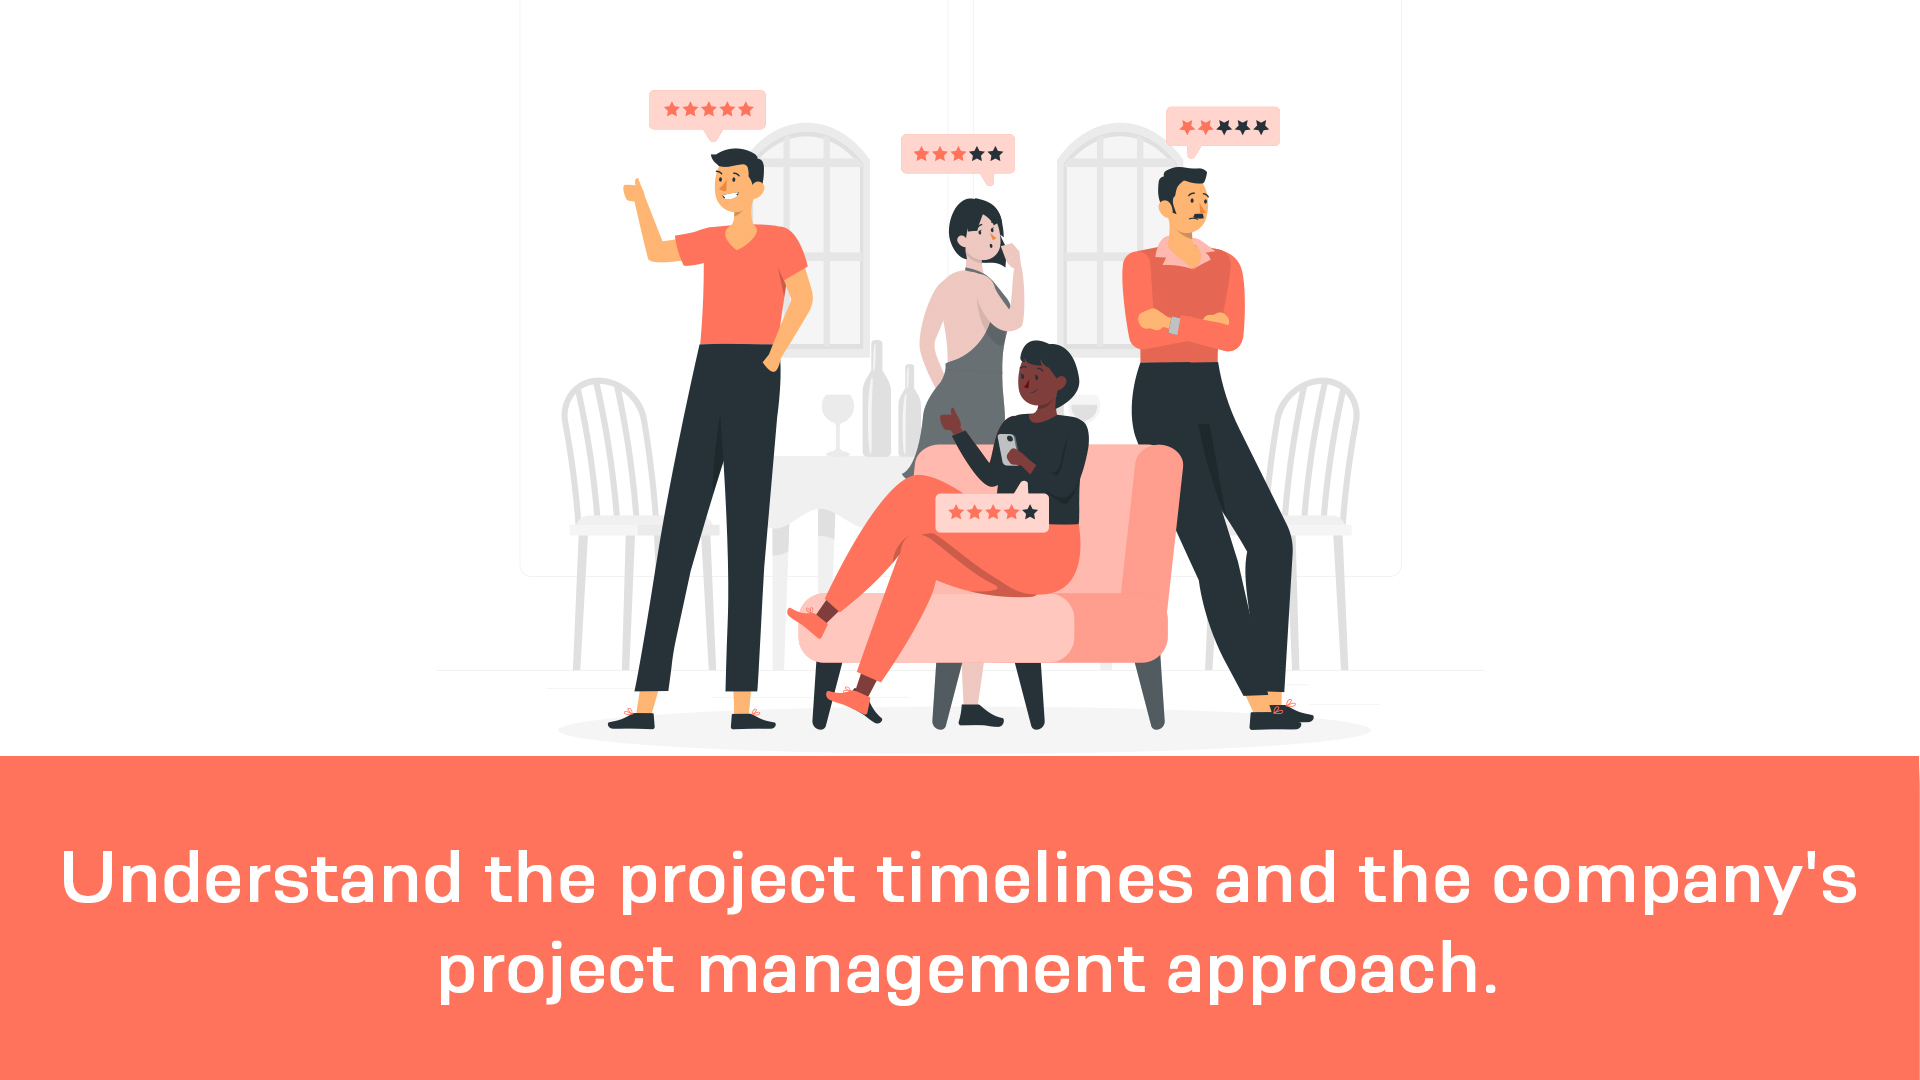 Discuss project timelines and the website designing company's project management approach